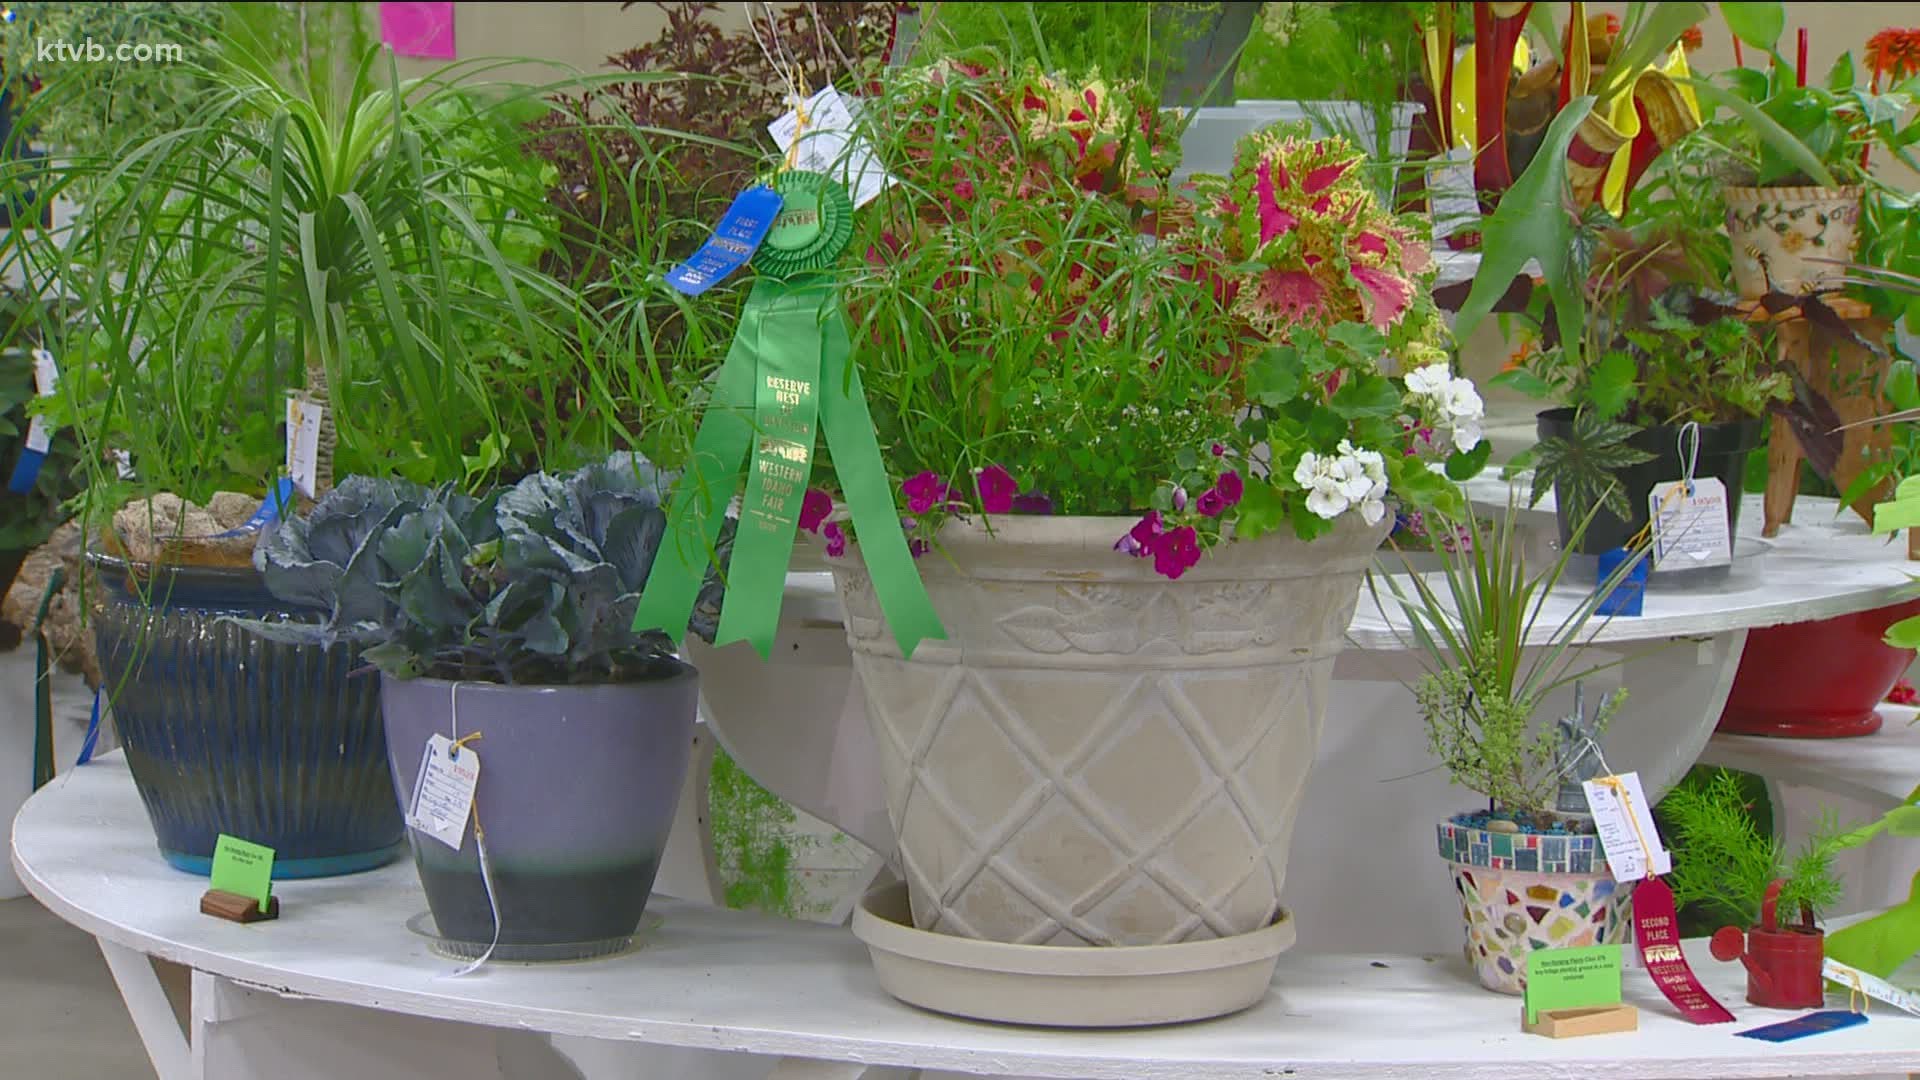 Jim Duthie revisits the Western Idaho Fair in 2019 to check out the winning floral entries that summer, and boy are they creative!